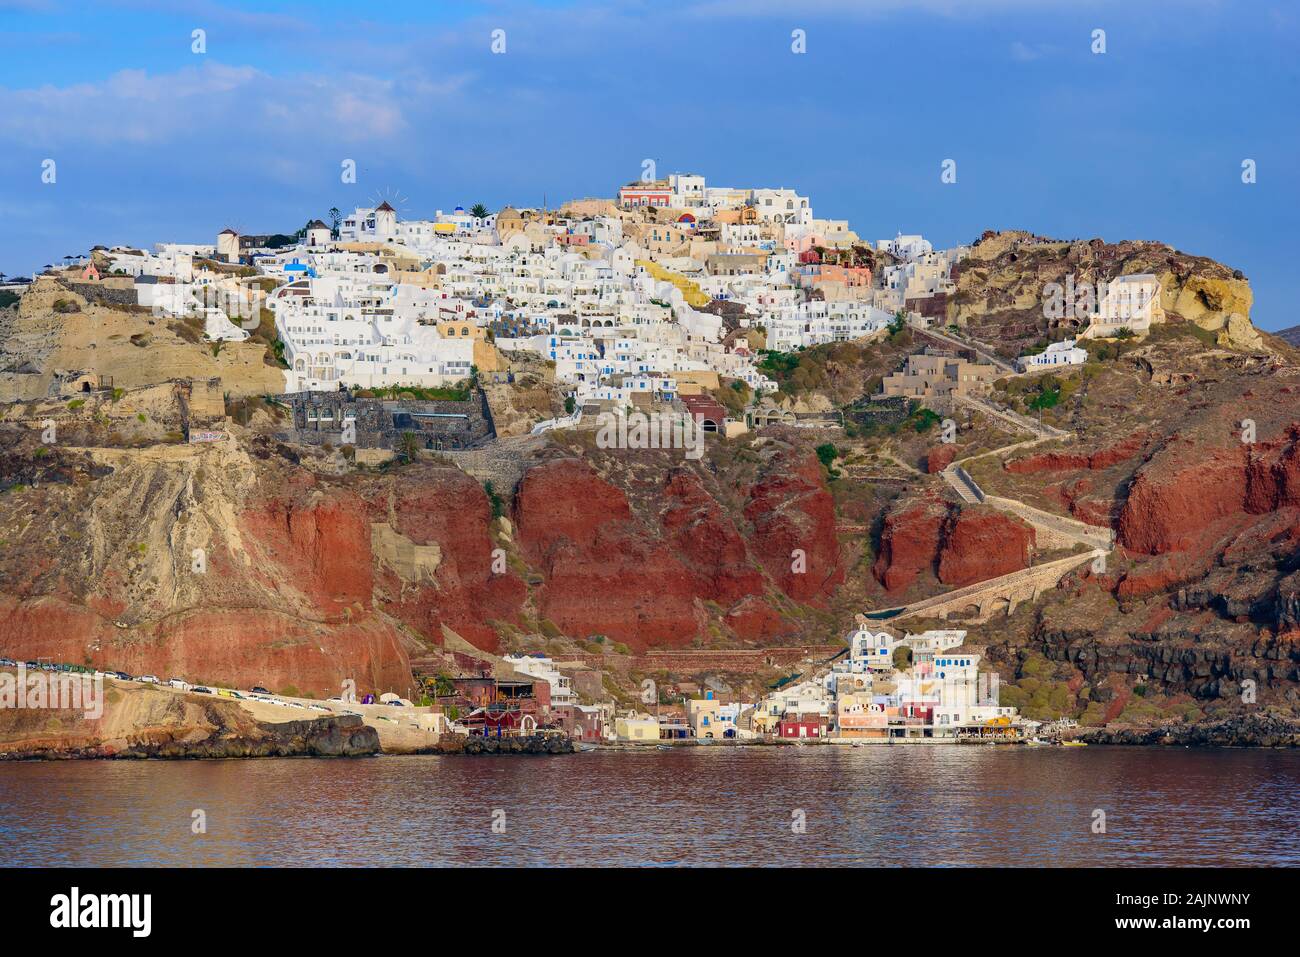 View of the white buildings of Oia village from Aegean Sea, Santorini, Greece Stock Photo